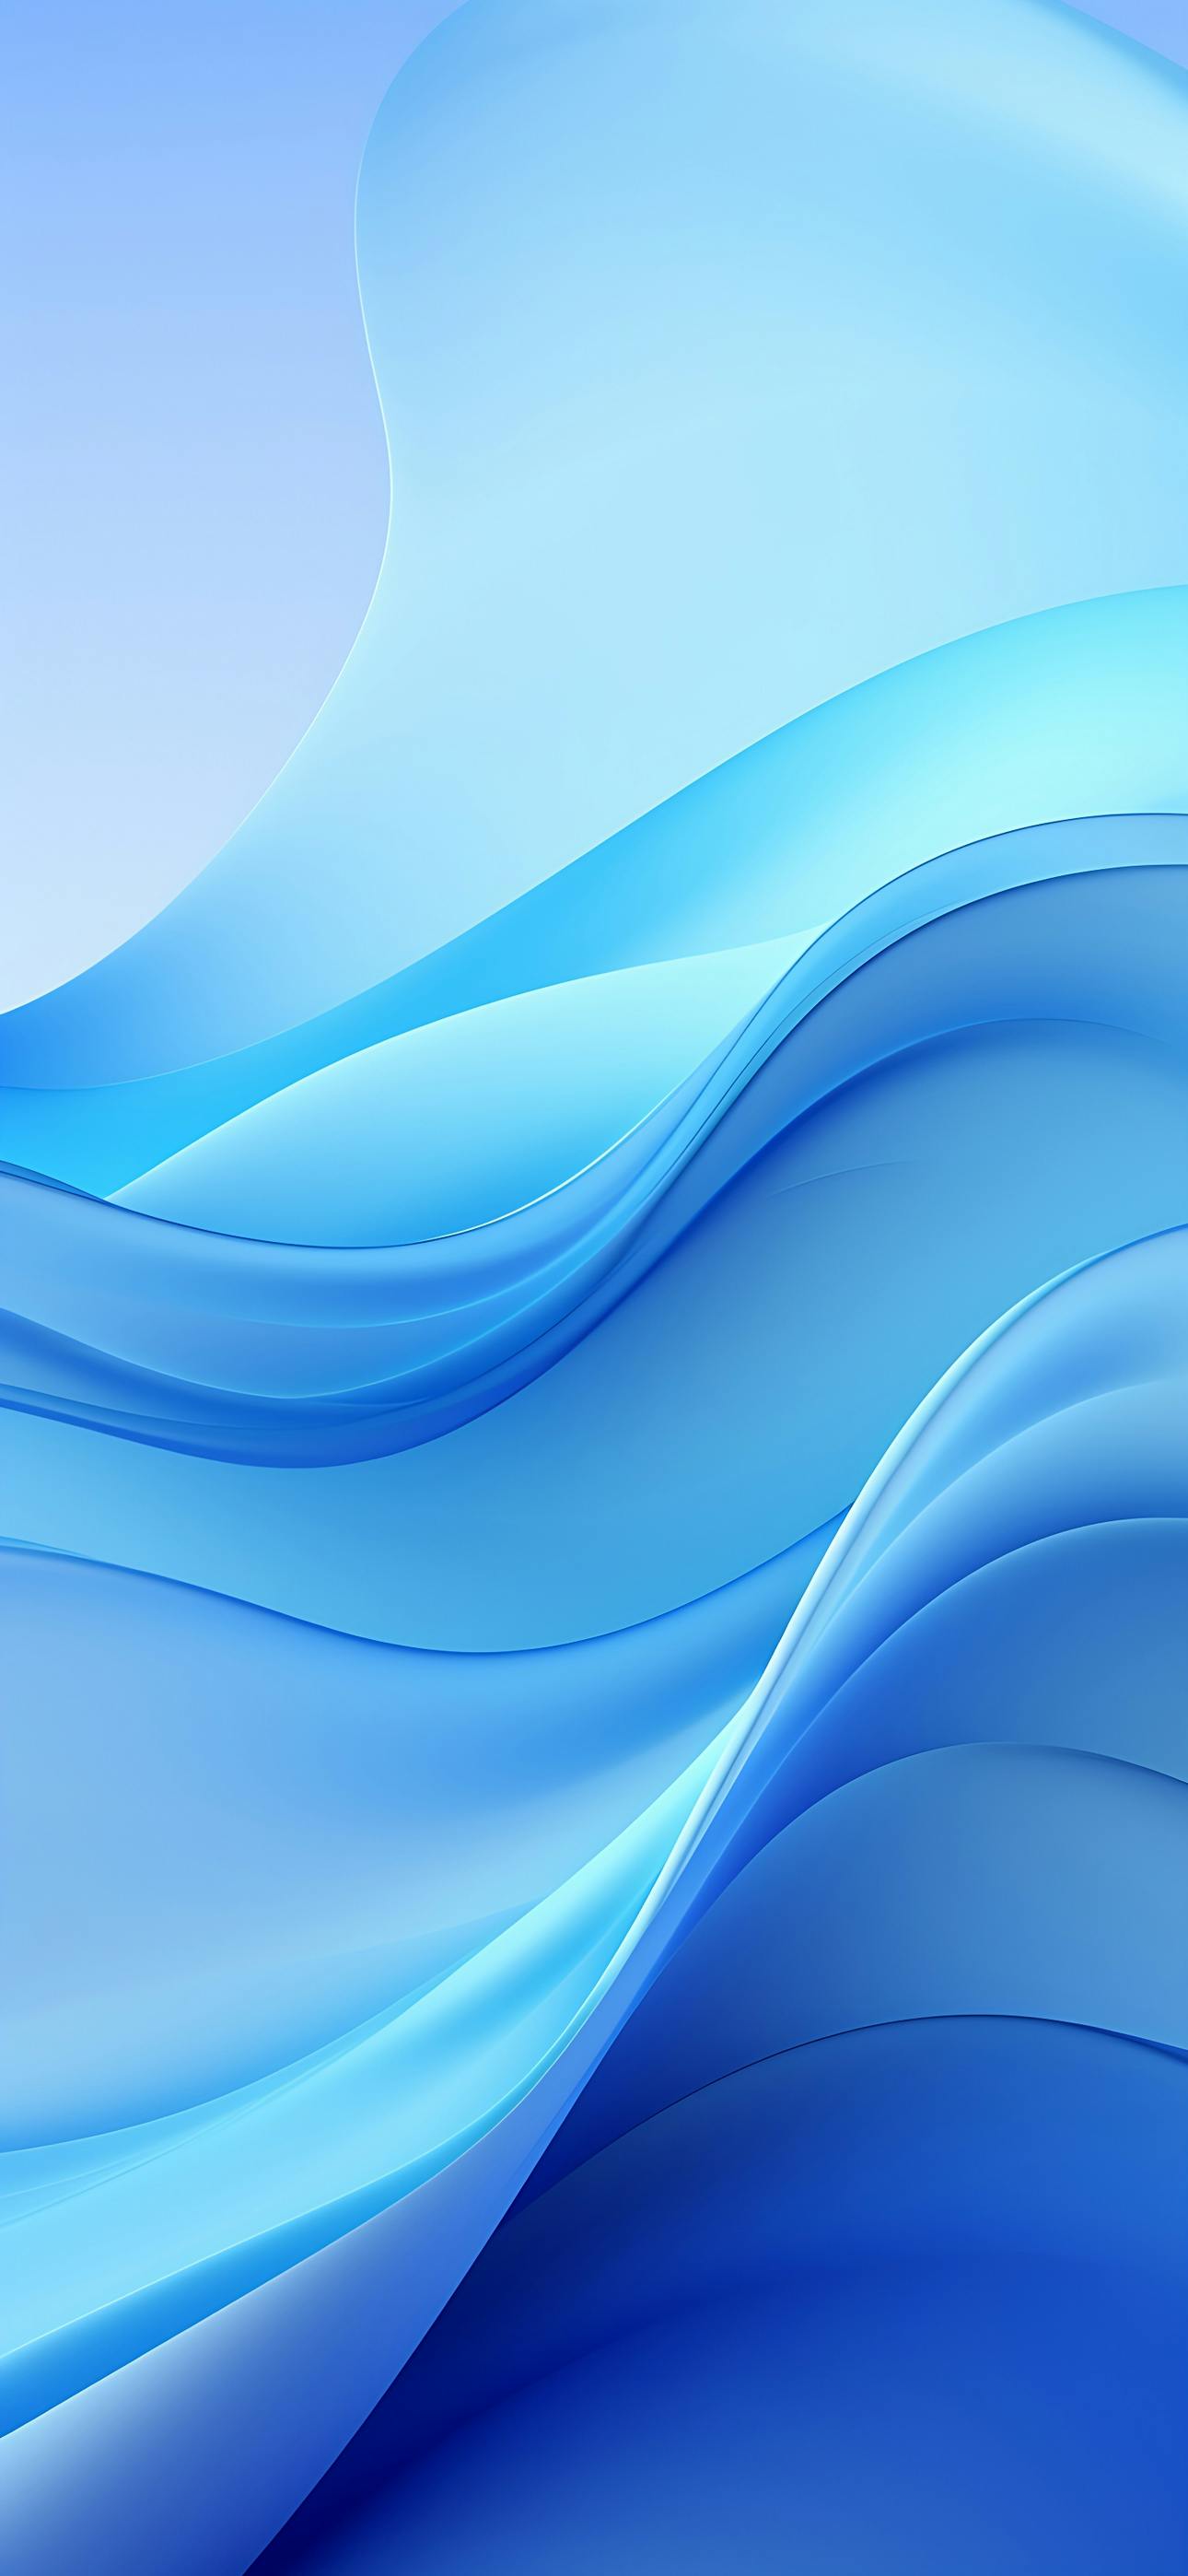 Clean blue gradient wallpaper for iPhone